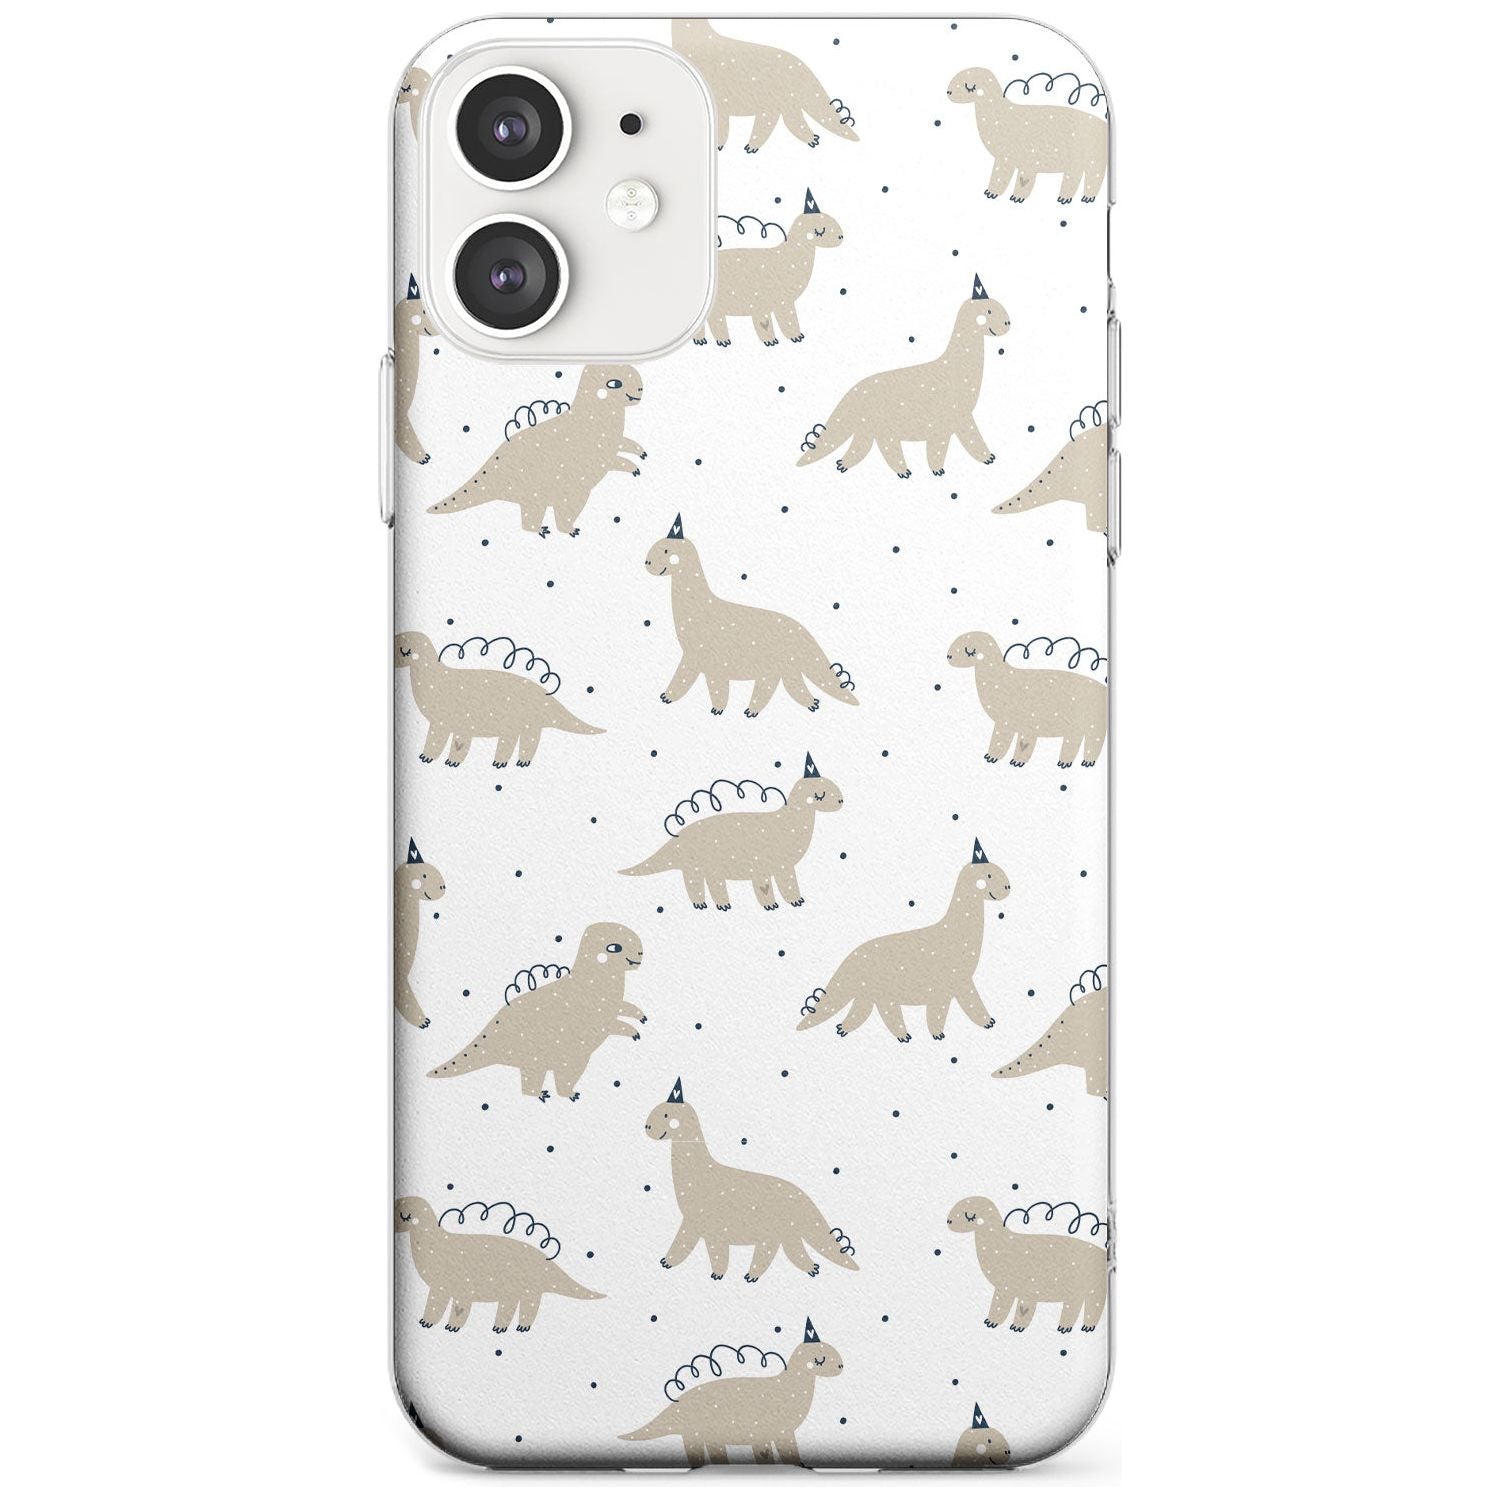 Adorable Dinosaurs Pattern Slim TPU Phone Case for iPhone 11